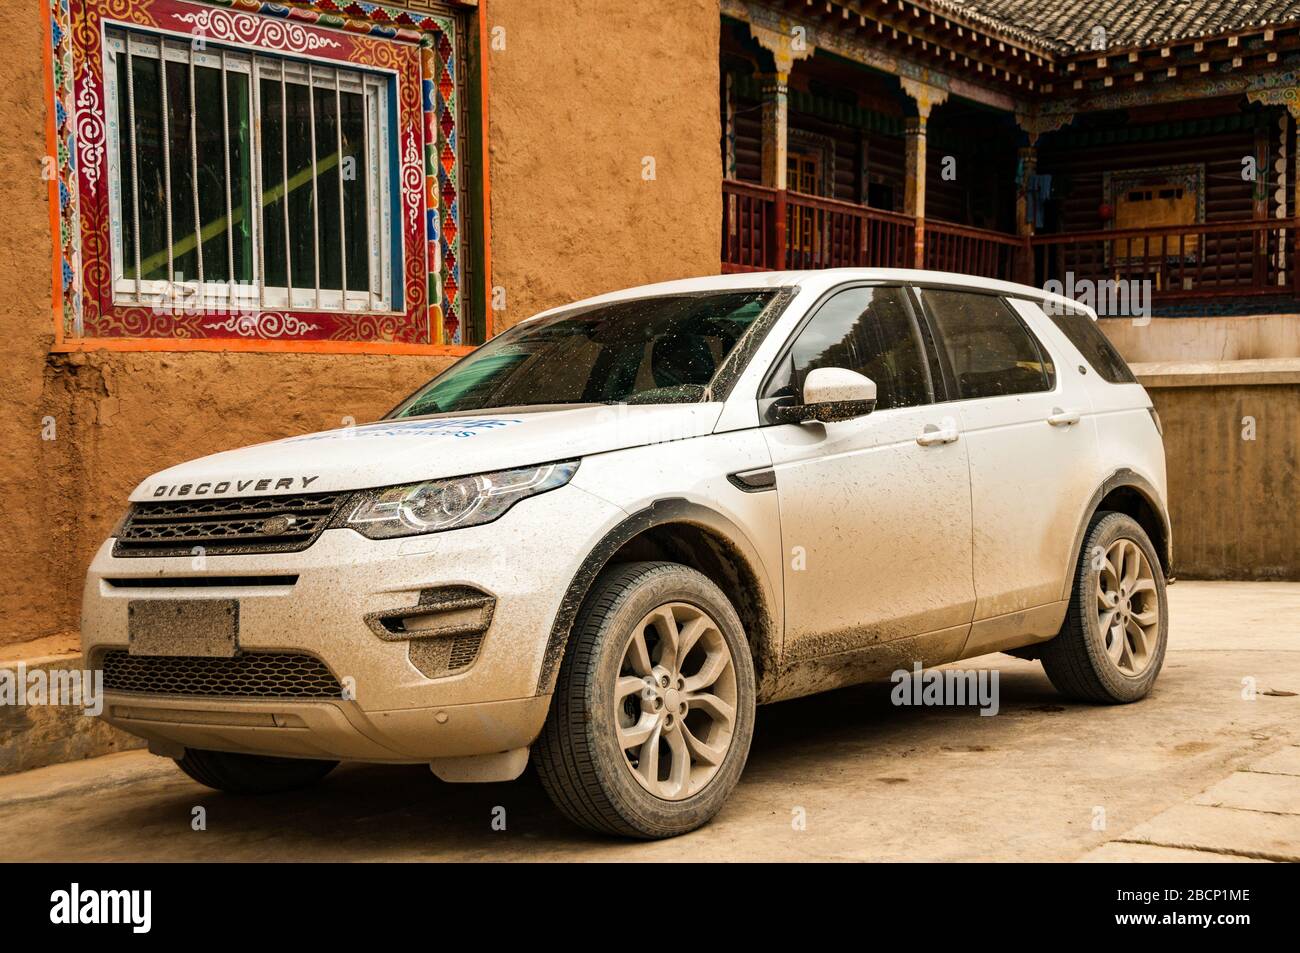 Land Rover Discovery Sport parked outside a Tibetan style building in Malong Village, Sichuan Province, China. Stock Photo